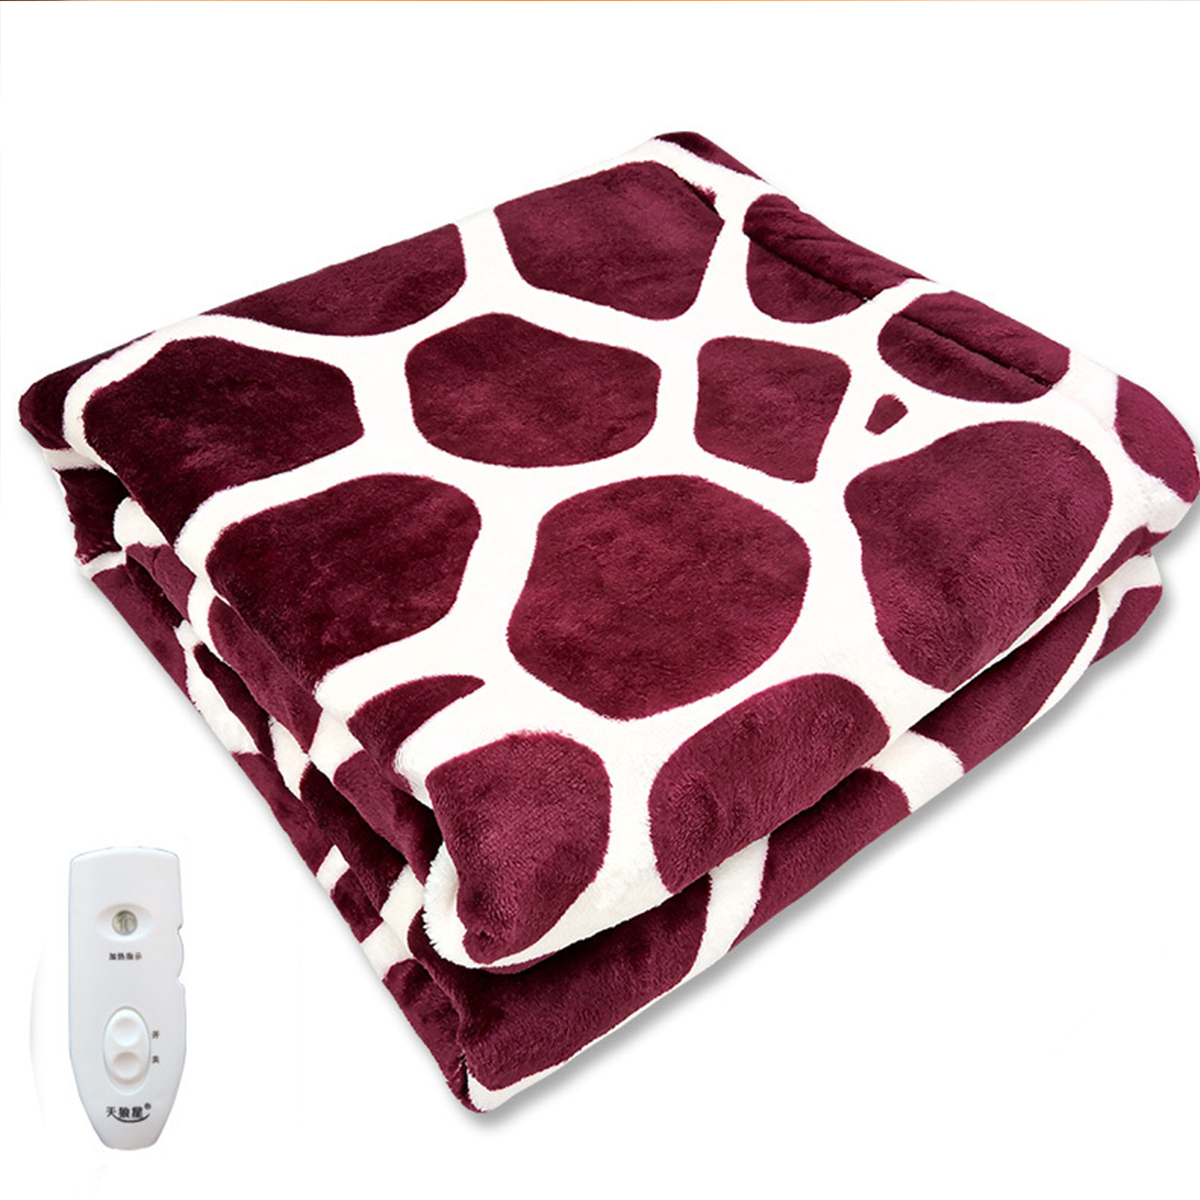 

220V 70W Electric Heated Travel Blanket Soft Flannel Warm Quilt Blankets For Car Office